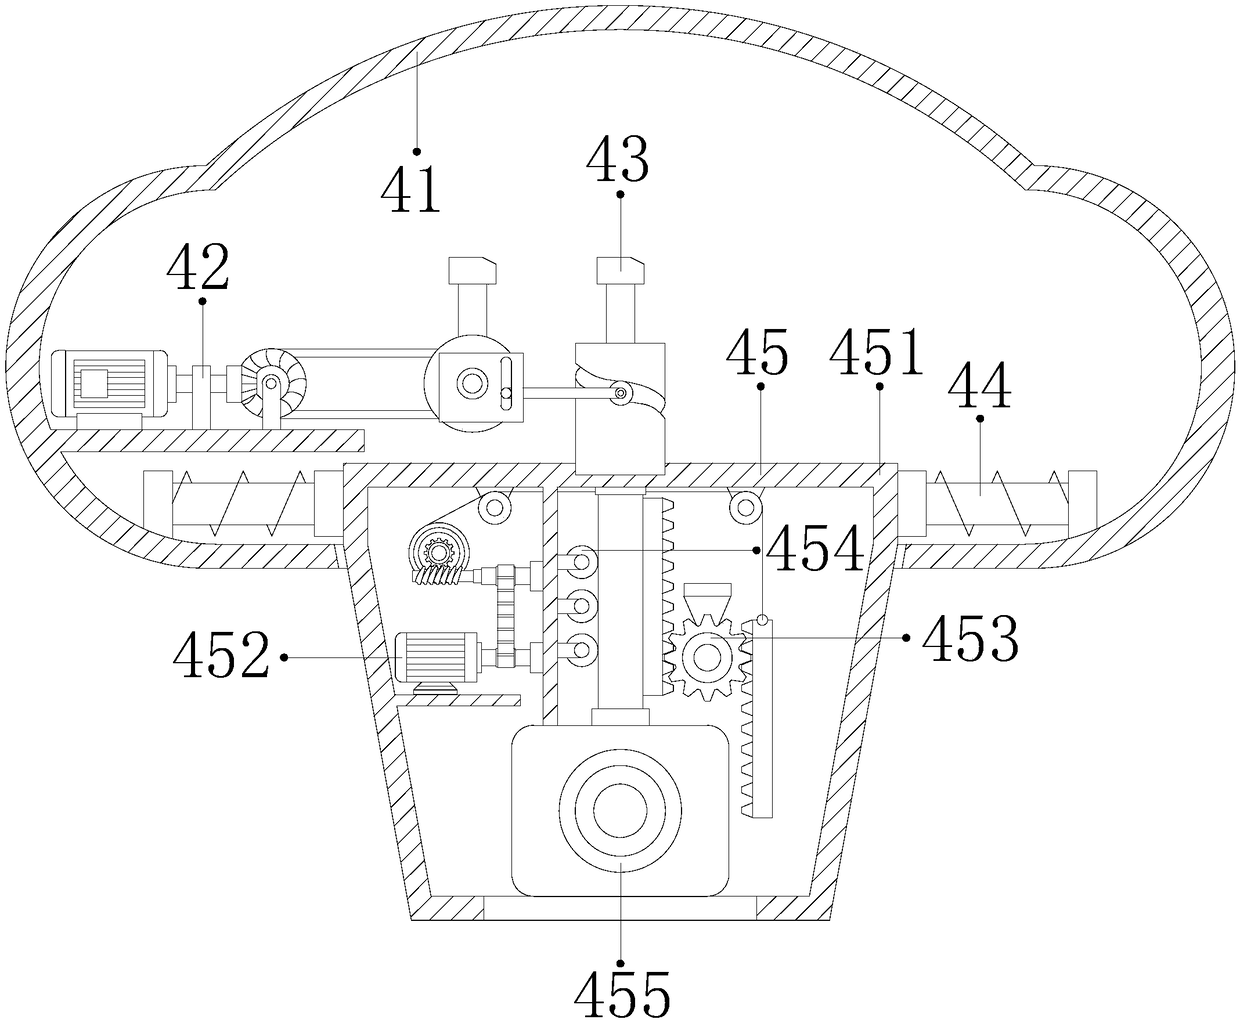 Camera suspension for aerial photography of unmanned aerial vehicle